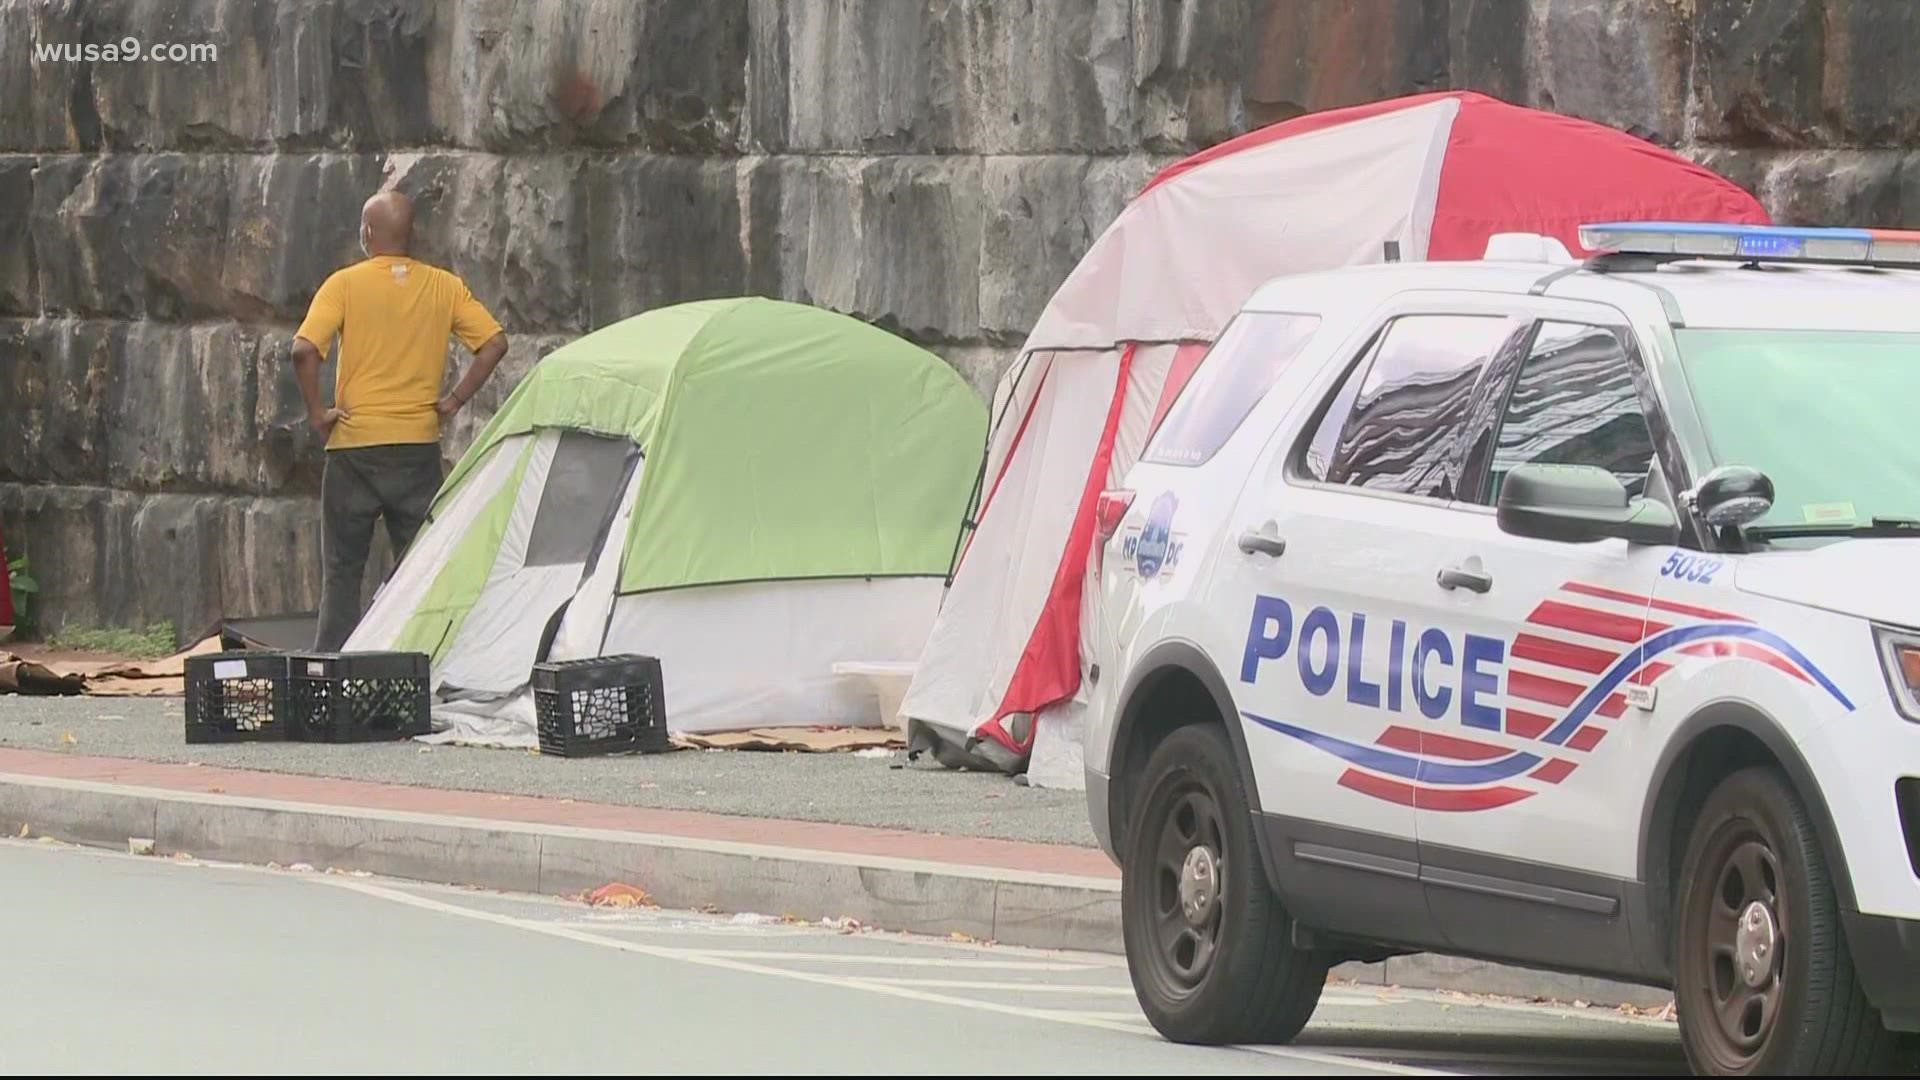 Community groups are asking city officials to stop creating "no-tent zones" and clearing of homeless encampments until each unhoused resident finds good housing.